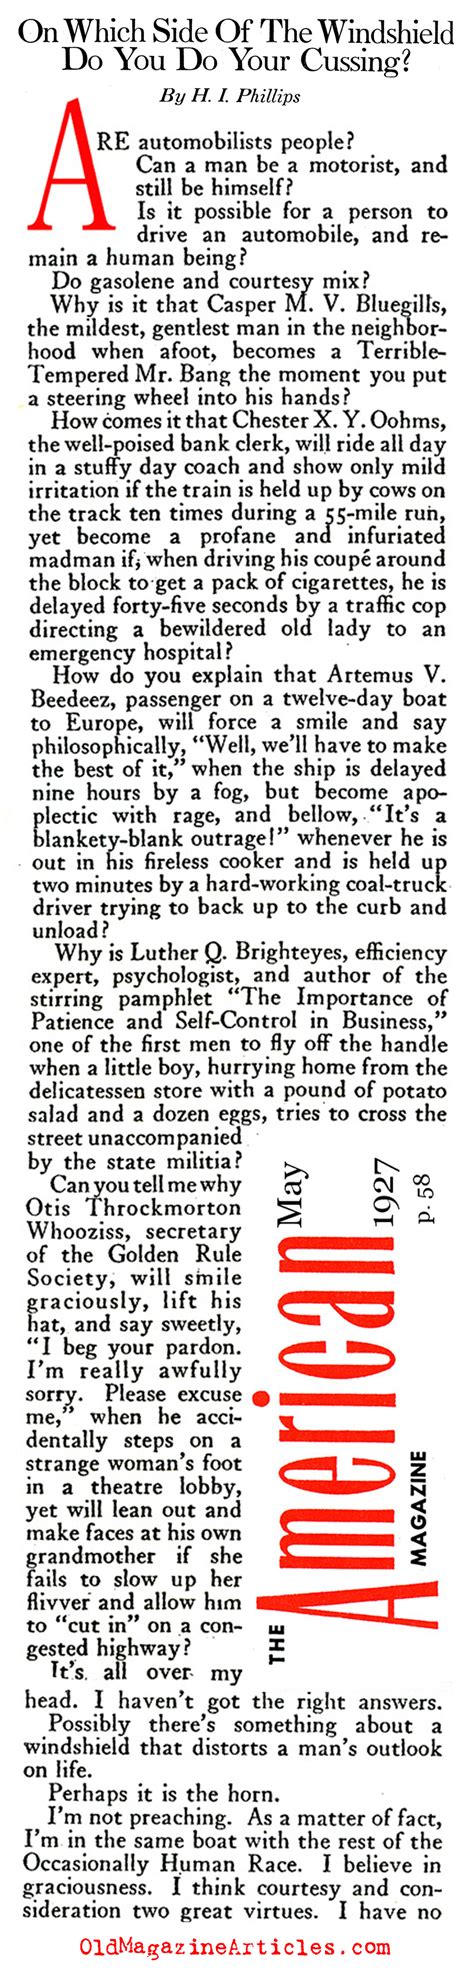 ROAD RAGE ESSAY,1920S ROAD RAGE MAGAZINE ARTICLE,ROAD RAGE FRUSTRATION,ANGRY DRIVING,ARROGANT 